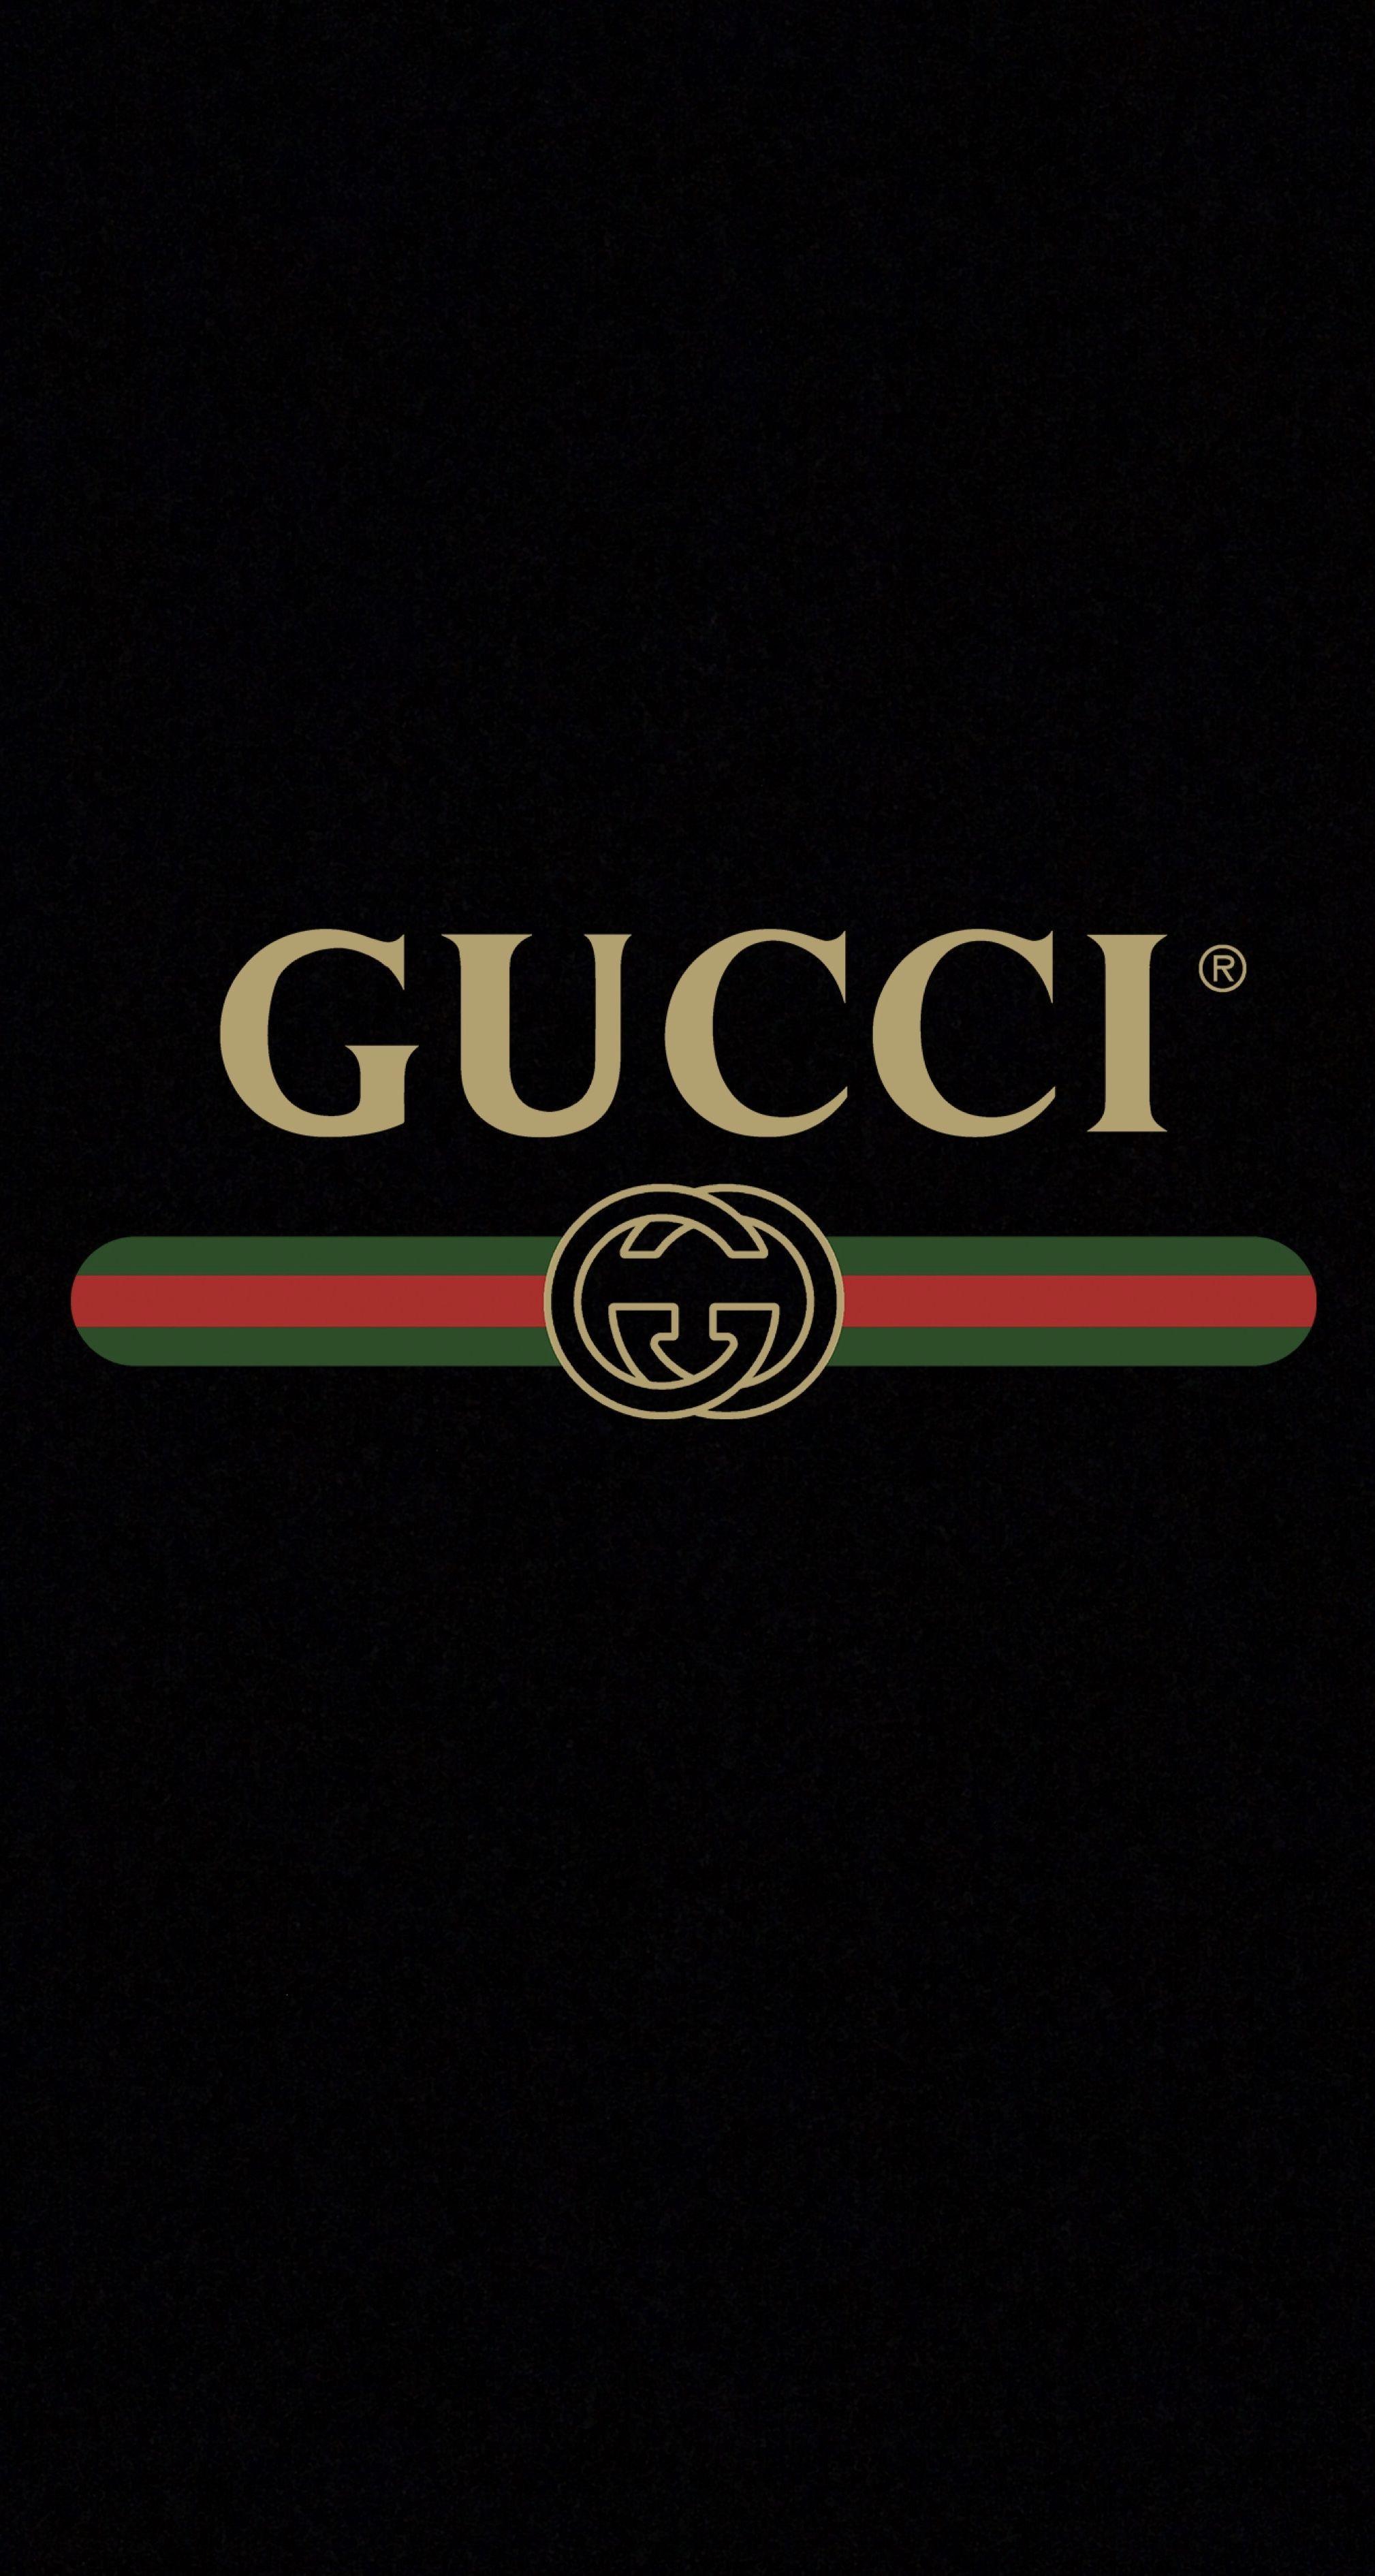 Gucci Logo Iphone Wallpapers Top Free Gucci Logo Iphone Backgrounds Wallpaperaccess